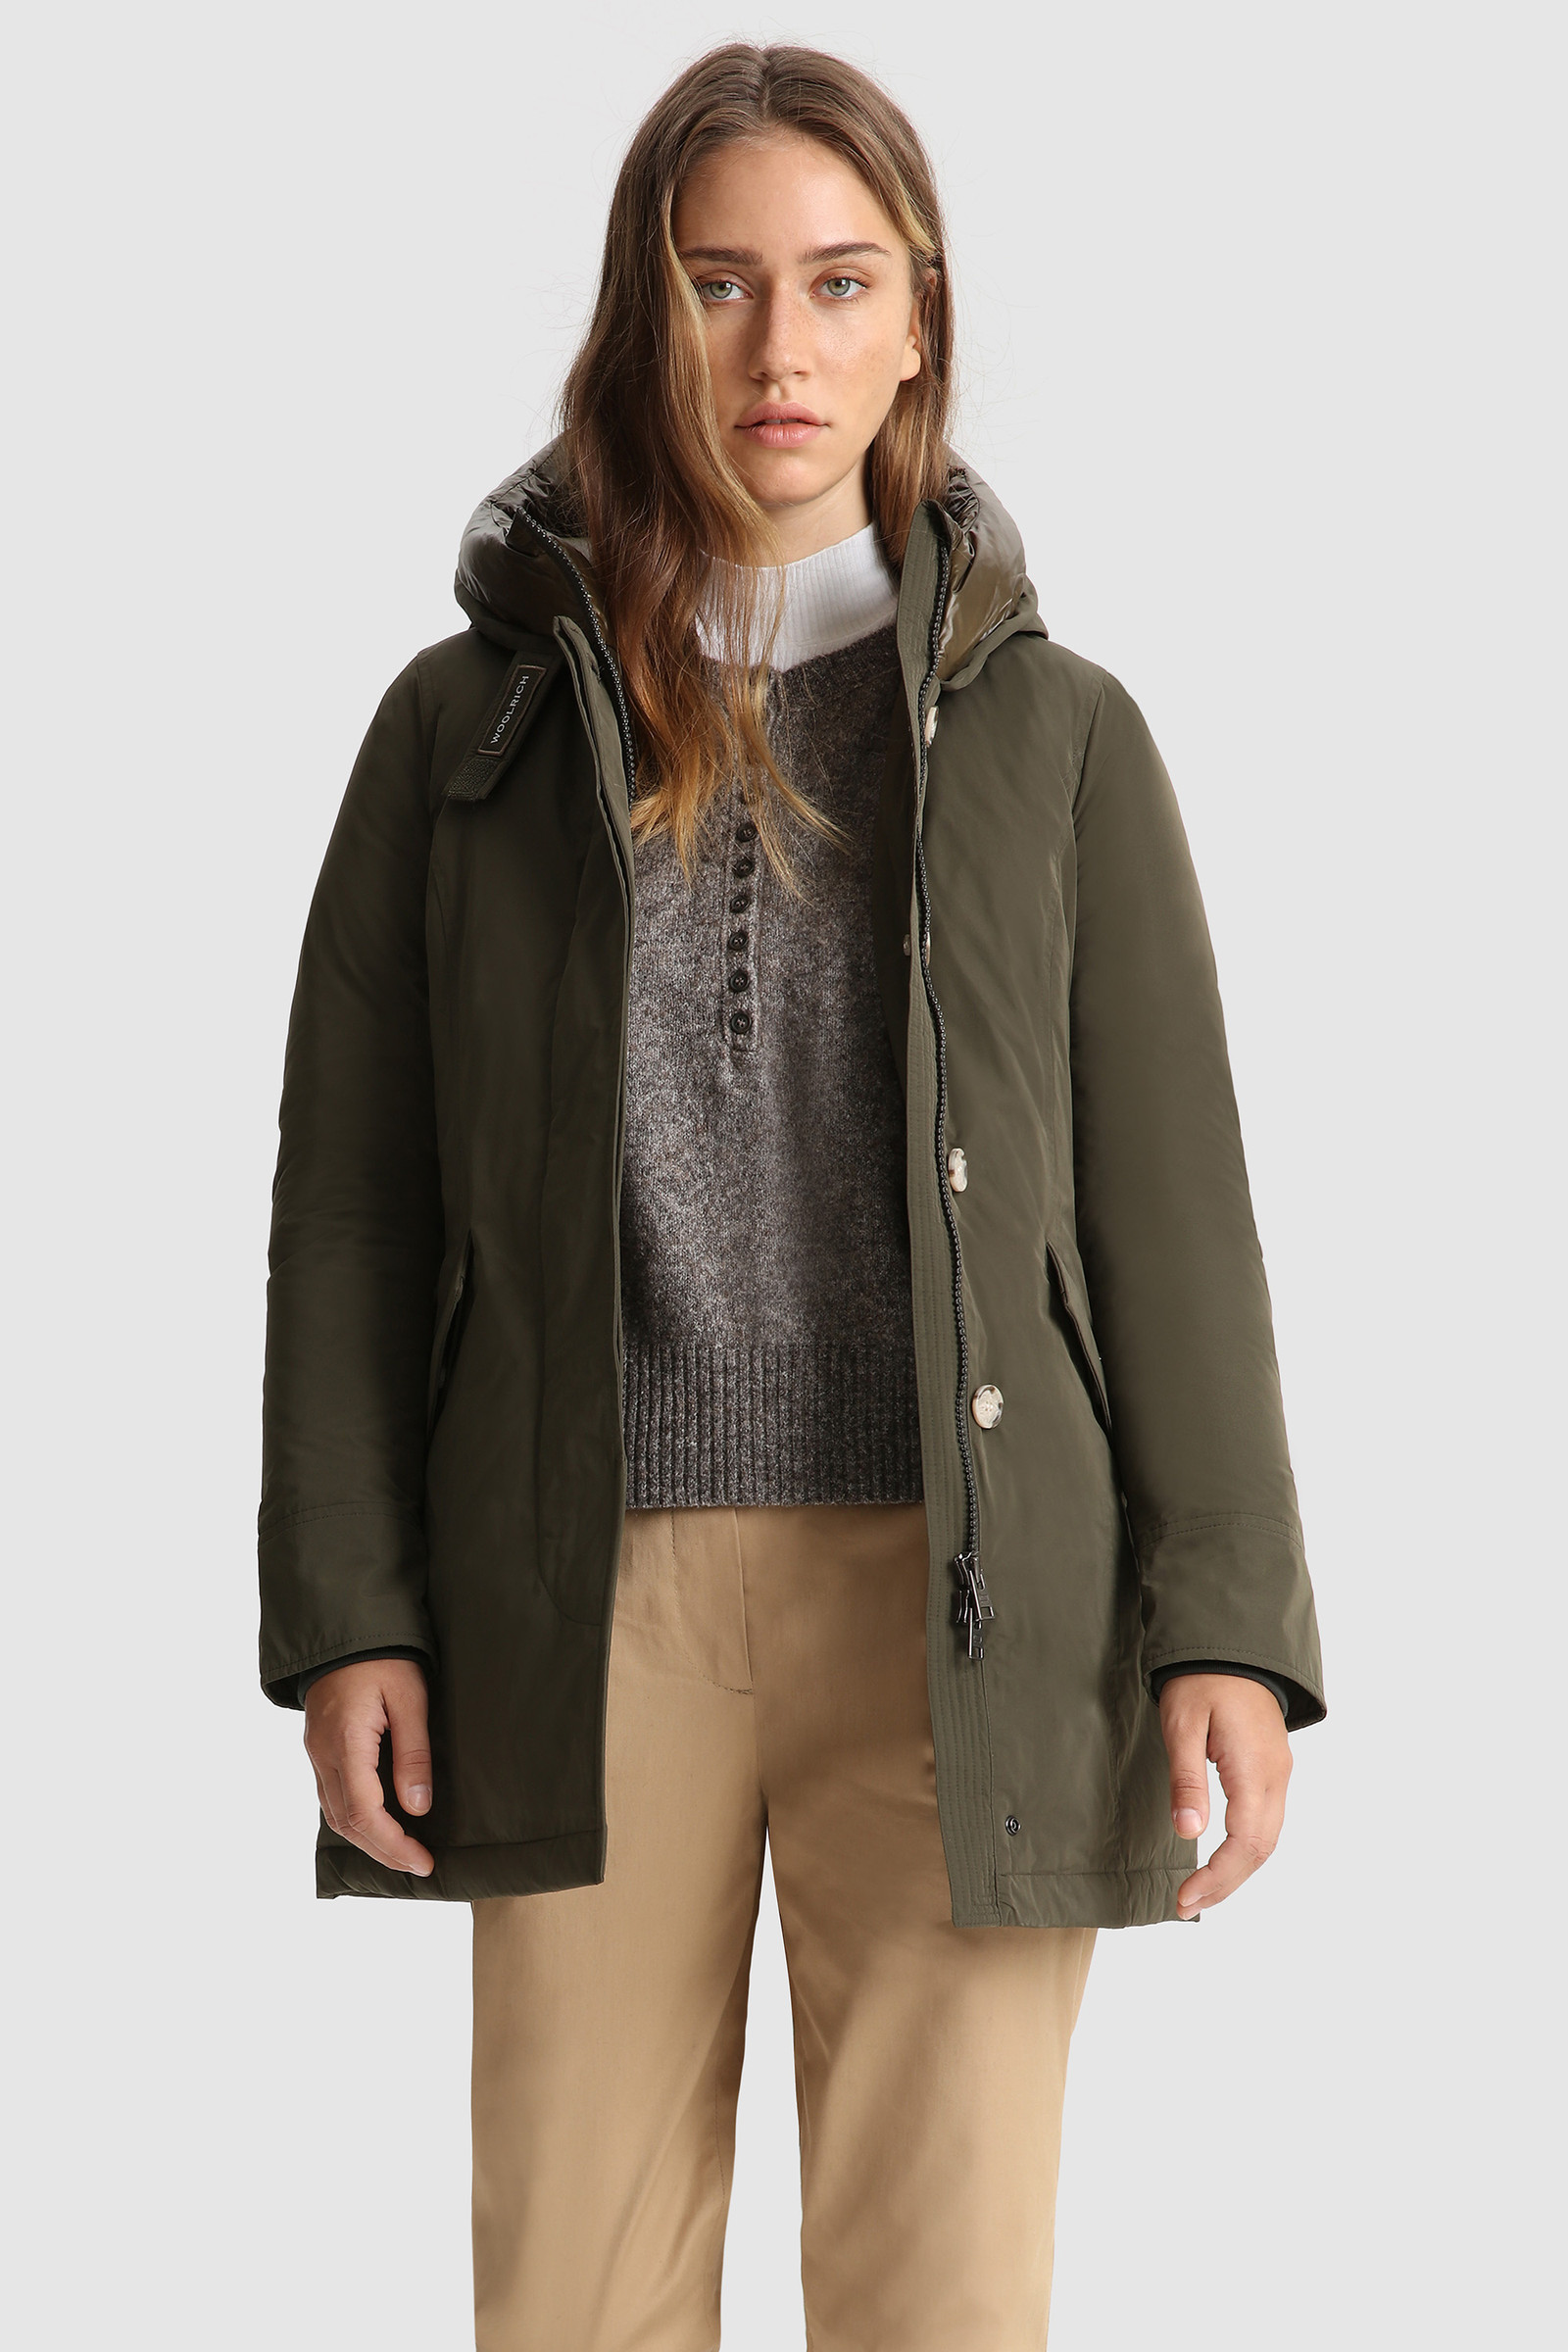 Hoes Kleverig Mijlpaal Women's Arctic Parka in City Fabric Green | Woolrich USA